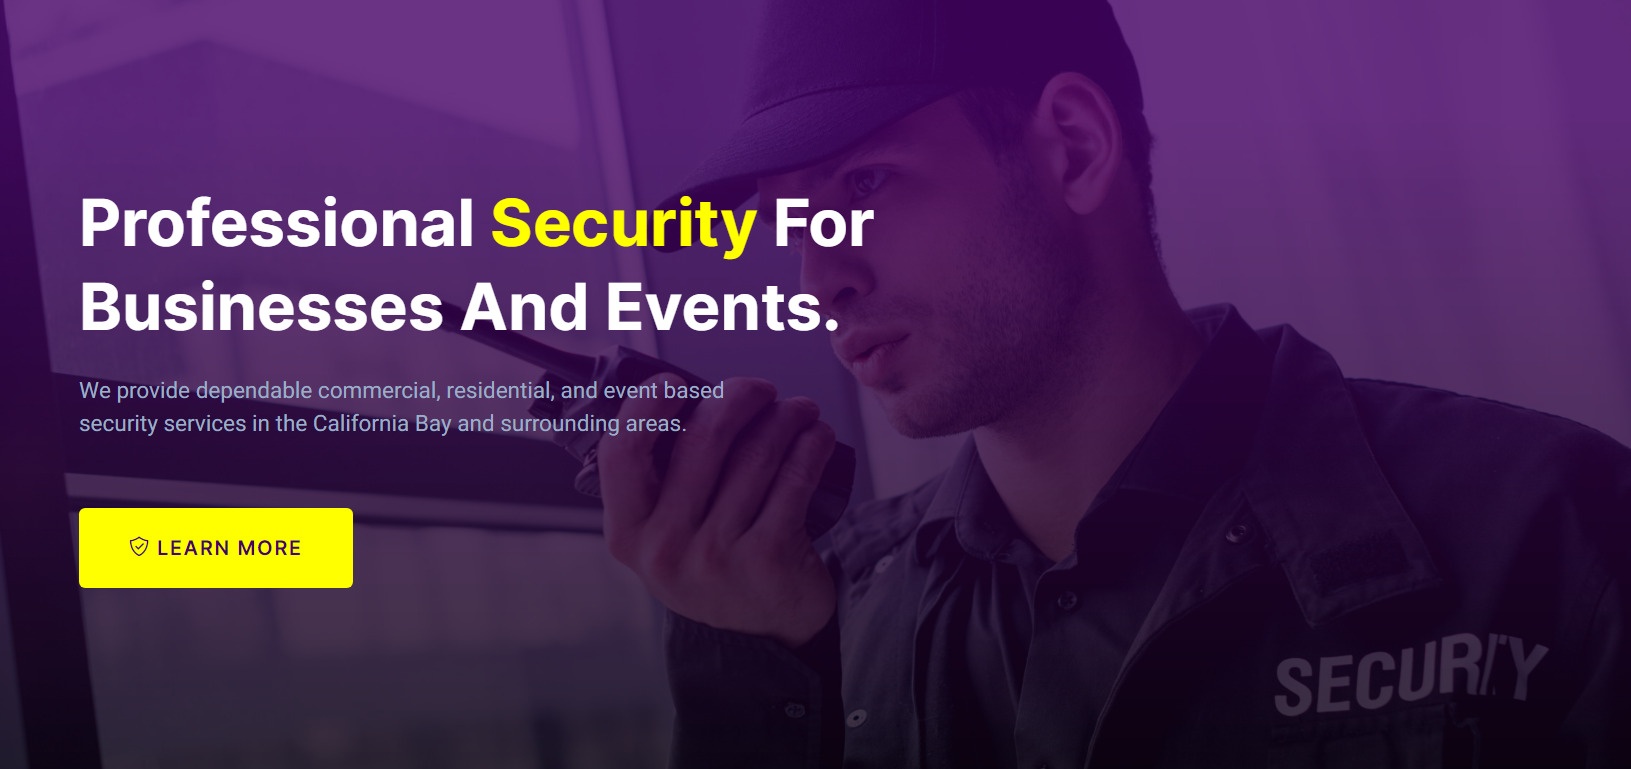 Five Star Security & Event Staffing - Oakland CA on CitySpotz | Providing dependable commercial security, residential security, private security, and event based security services in the California Bay and surrounding areas.